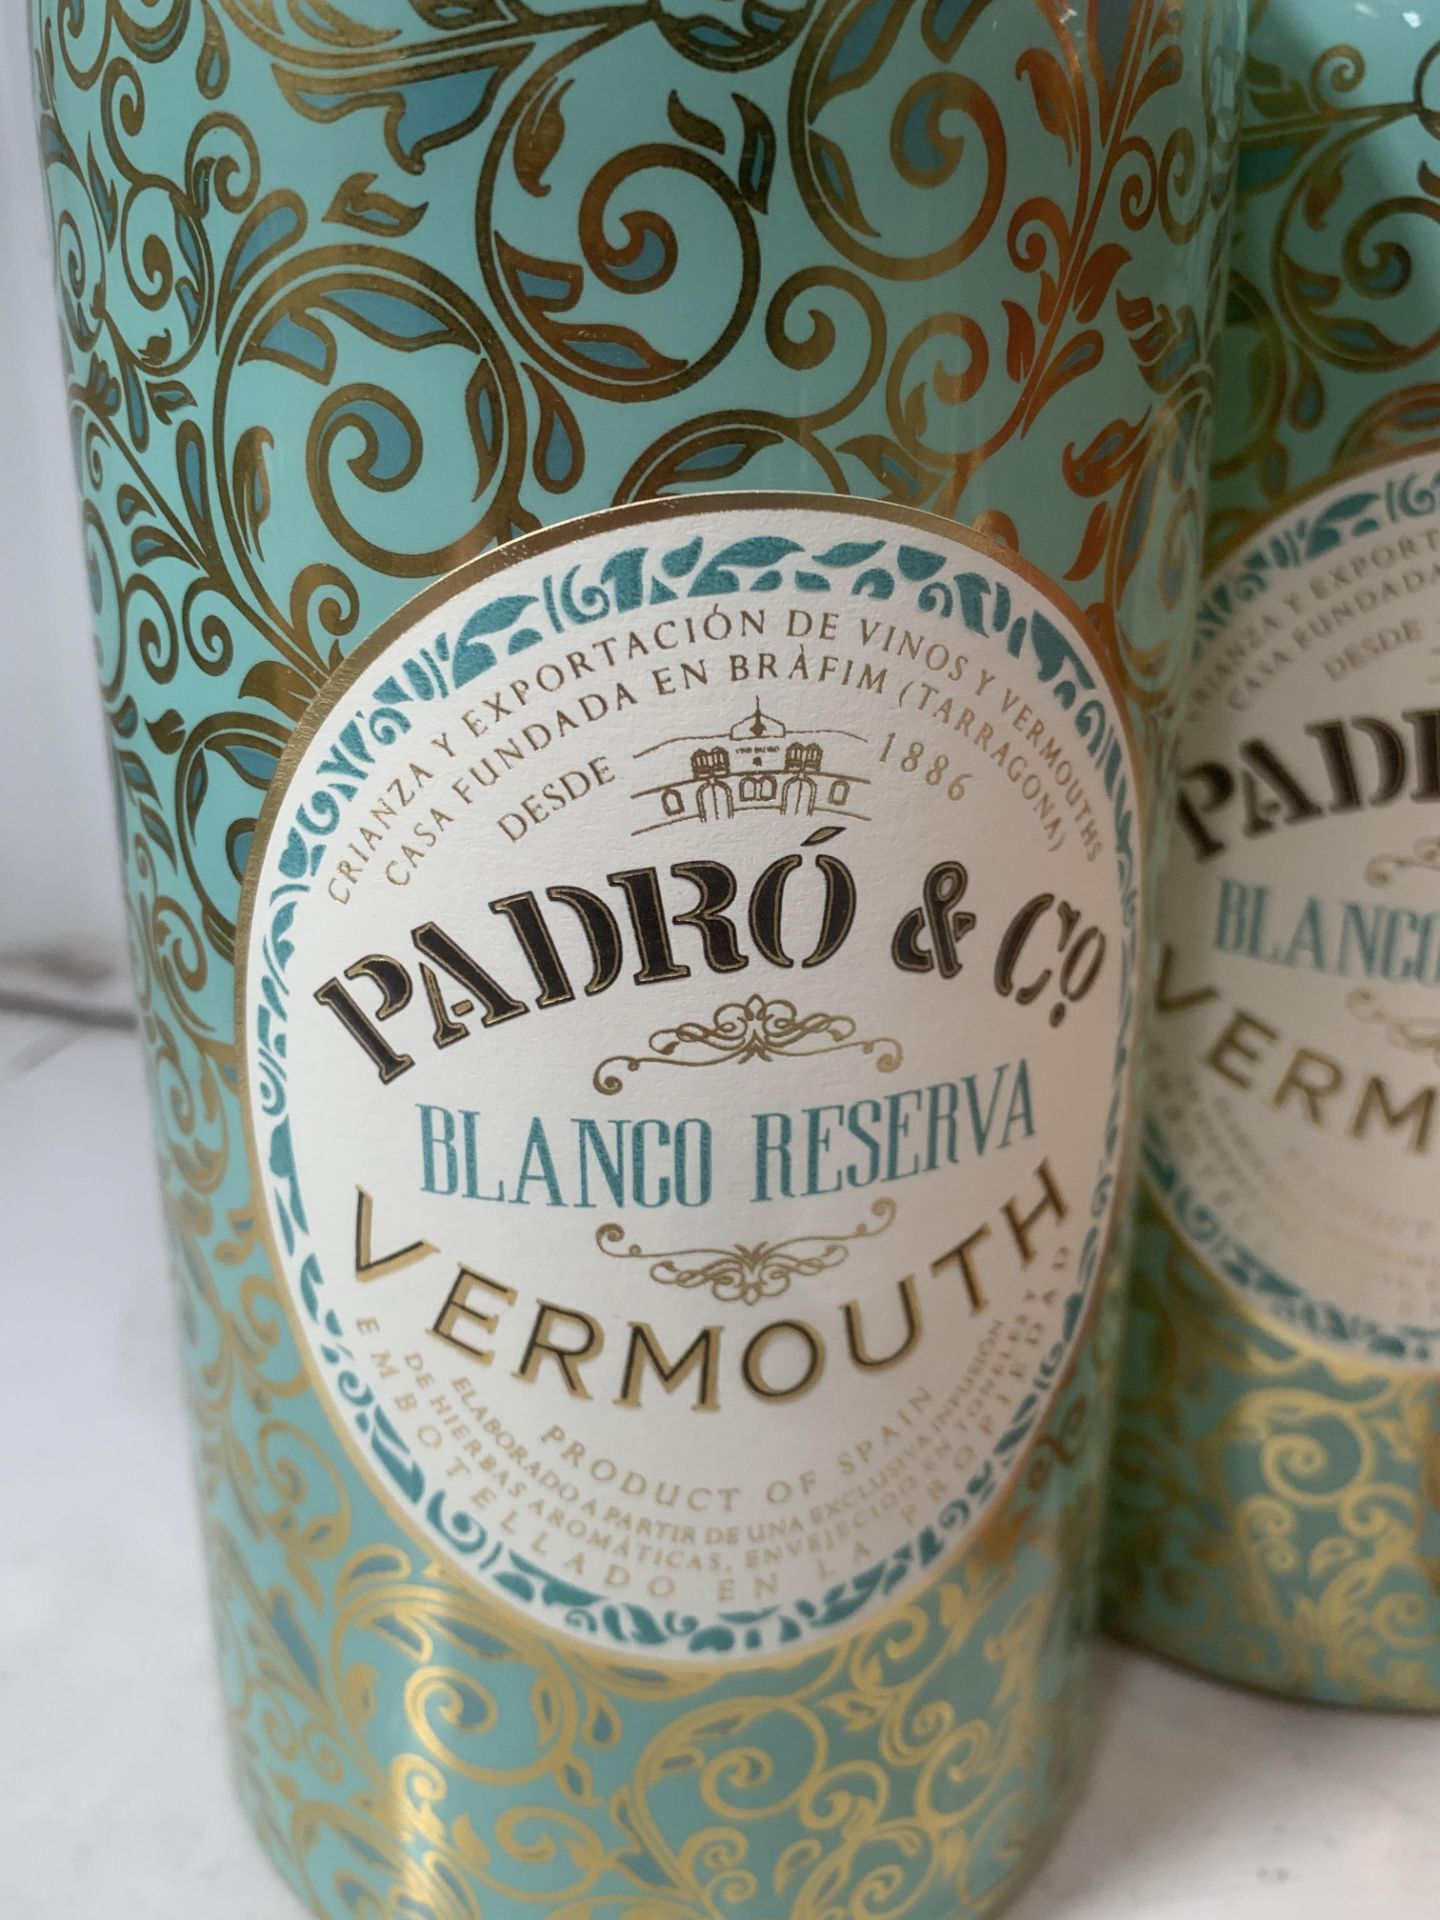 6x Padro & Co. Bottles of Vermouth; 4x Blanco Reserva 18%, 75cl and 2x Rojo Clasico 18%, 75cl - Image 3 of 5